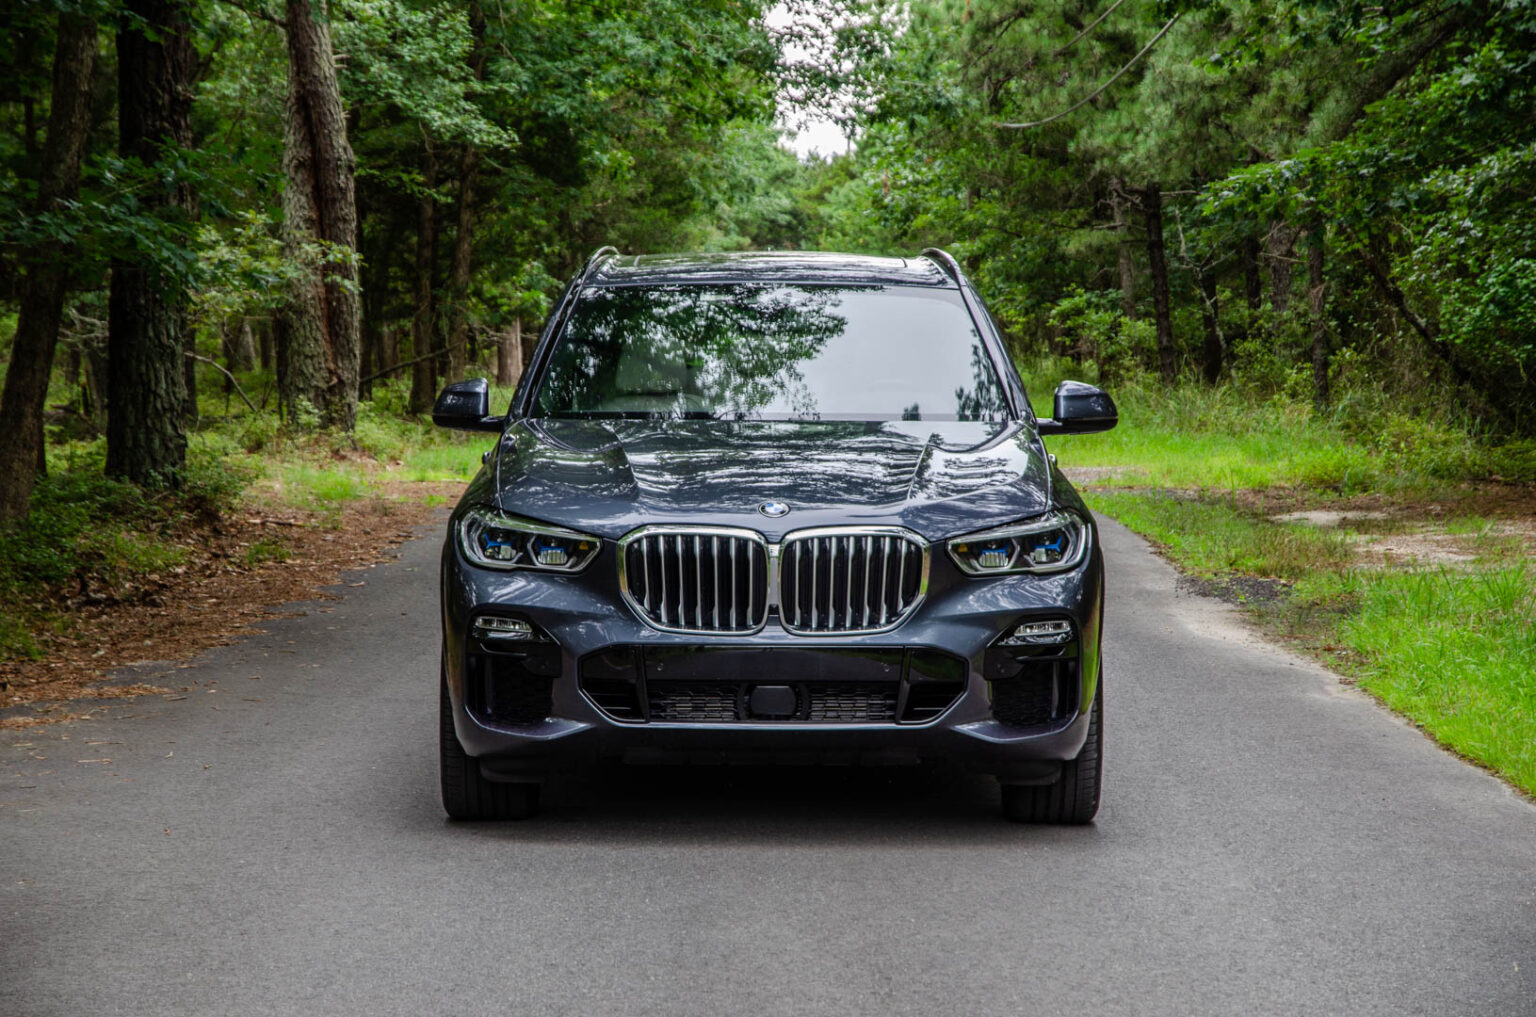 G05 BMW X5 look stunning with BMW XM features